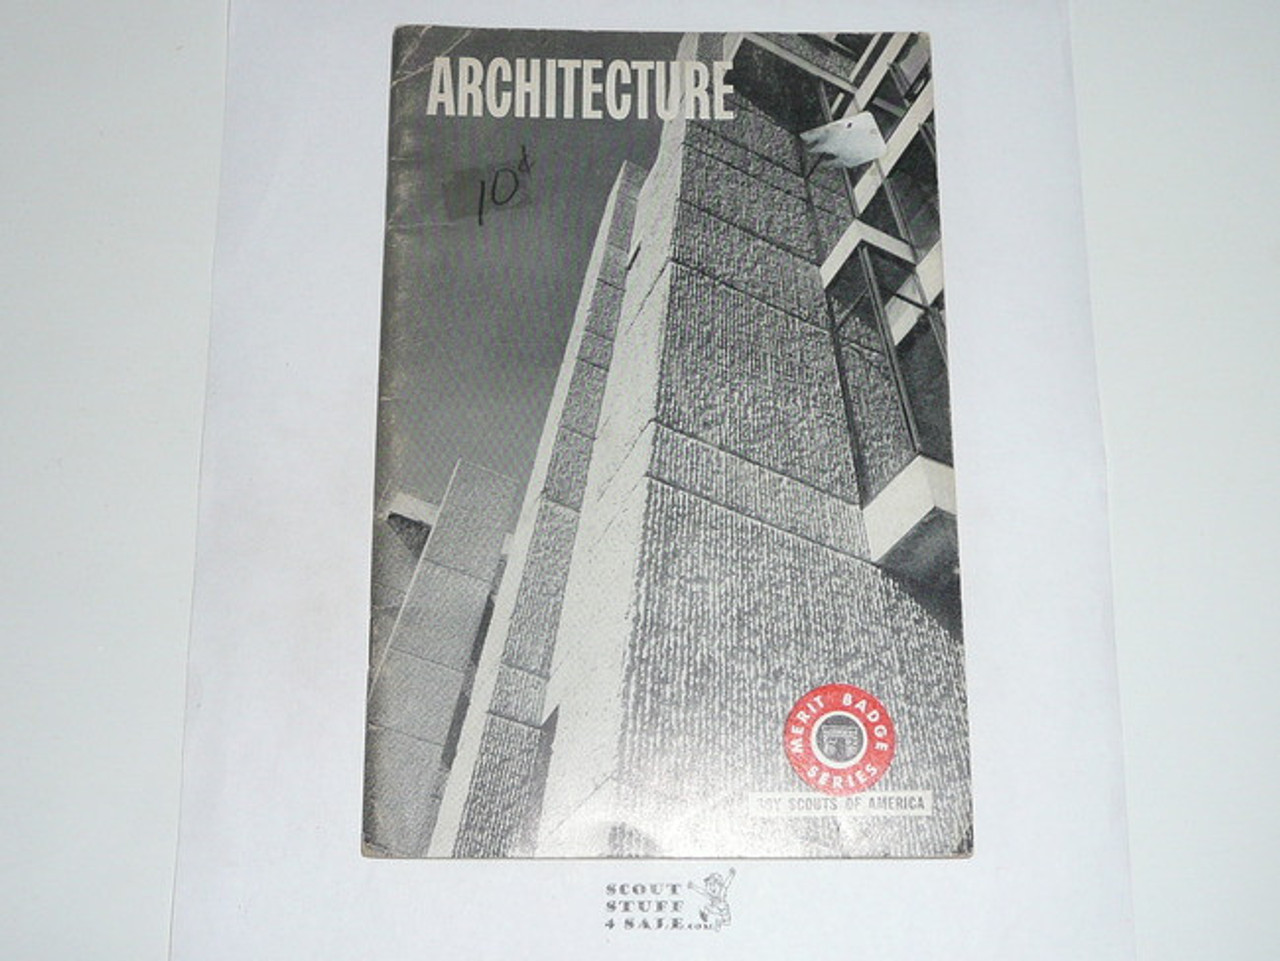 Architecture Merit Badge Pamphlet, Type 7, Full Picture, 6-67 Printing, troop number on cover